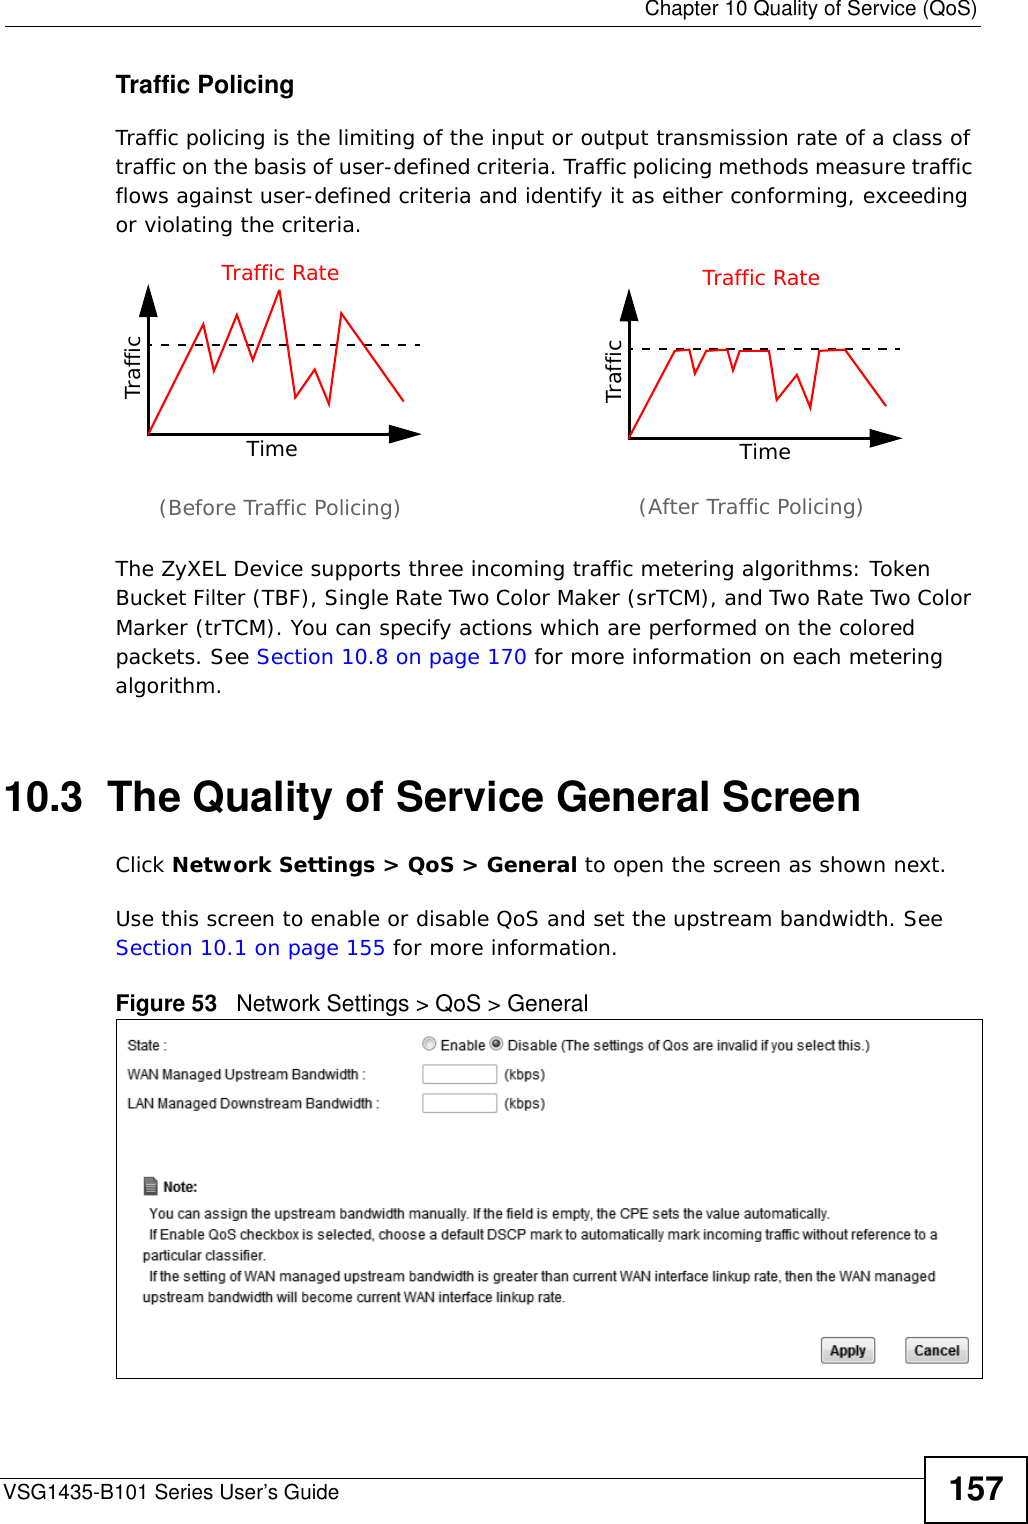  Chapter 10 Quality of Service (QoS)VSG1435-B101 Series User’s Guide 157Traffic PolicingTraffic policing is the limiting of the input or output transmission rate of a class of traffic on the basis of user-defined criteria. Traffic policing methods measure traffic flows against user-defined criteria and identify it as either conforming, exceeding or violating the criteria.The ZyXEL Device supports three incoming traffic metering algorithms: Token Bucket Filter (TBF), Single Rate Two Color Maker (srTCM), and Two Rate Two Color Marker (trTCM). You can specify actions which are performed on the colored packets. See Section 10.8 on page 170 for more information on each metering algorithm.10.3  The Quality of Service General Screen Click Network Settings &gt; QoS &gt; General to open the screen as shown next. Use this screen to enable or disable QoS and set the upstream bandwidth. See Section 10.1 on page 155 for more information.Figure 53   Network Settings &gt; QoS &gt; General TrafficTimeTraffic RateTrafficTimeTraffic Rate(Before Traffic Policing) (After Traffic Policing)